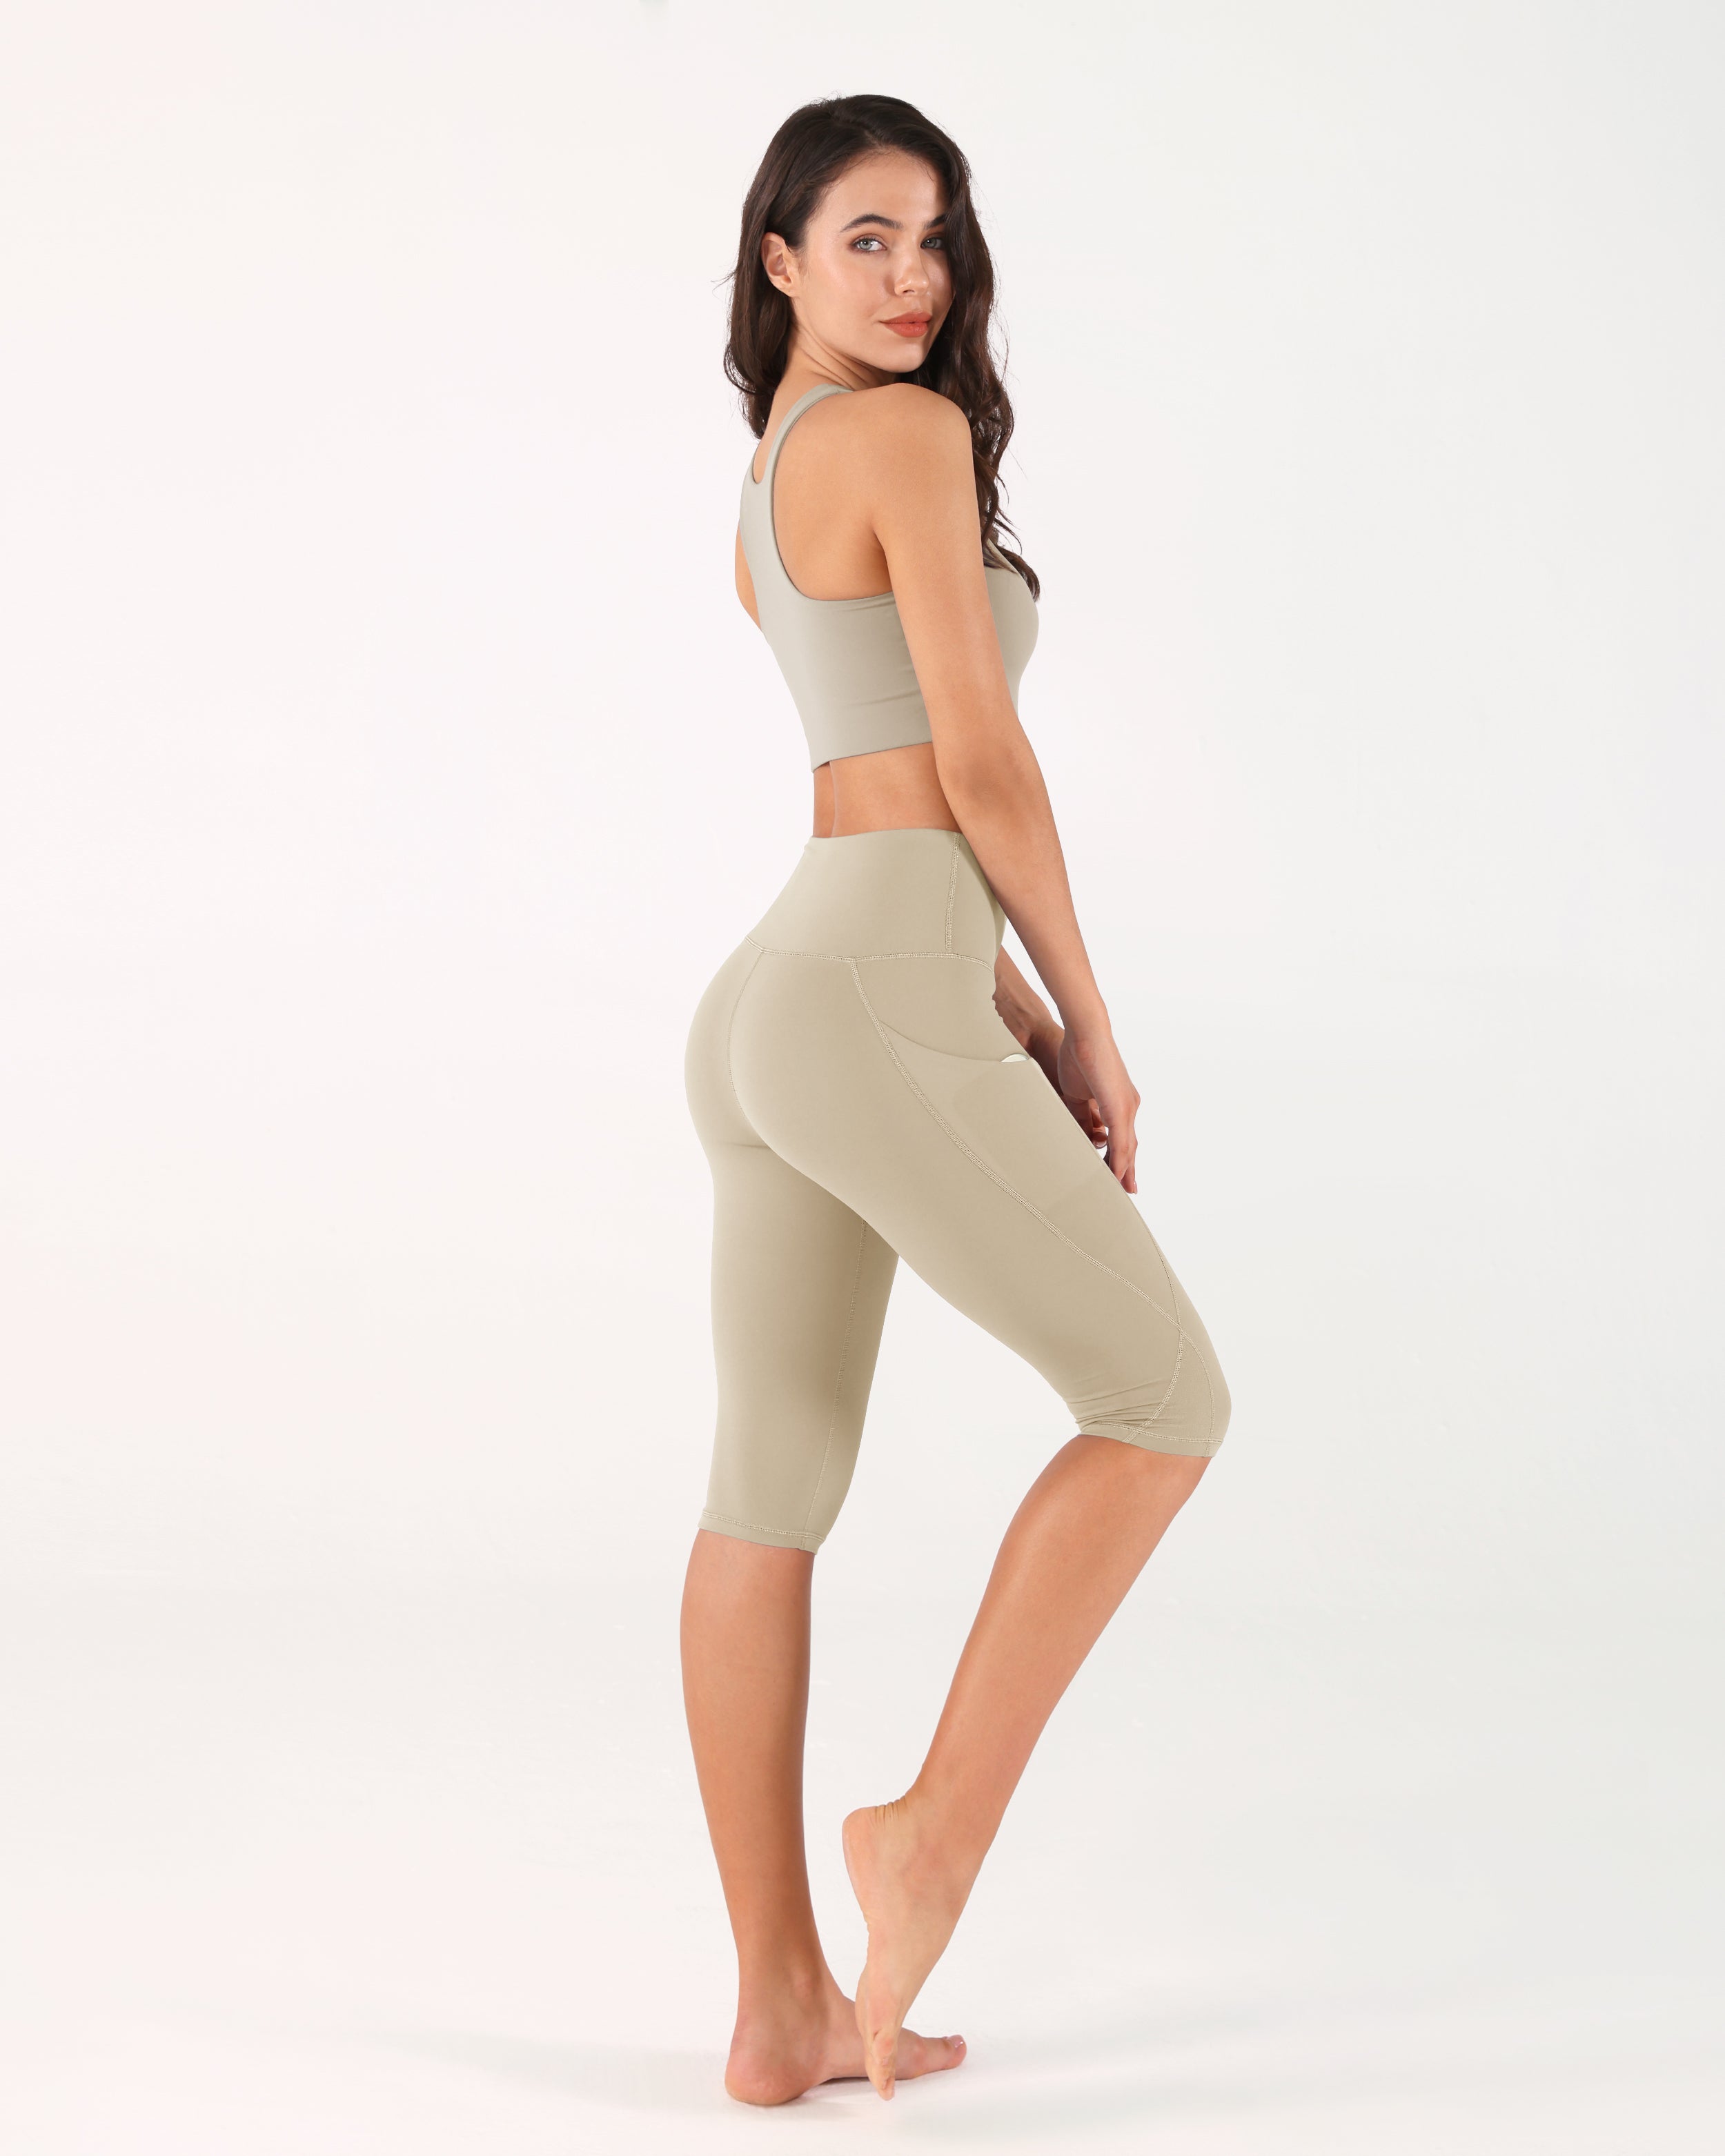 ODODOS High Waist Ruched Leggings for Women 25 / 28 Buttery Soft Crossover  Yoga Pants, Shaker Beige, L : Buy Online at Best Price in KSA - Souq is now  : Fashion